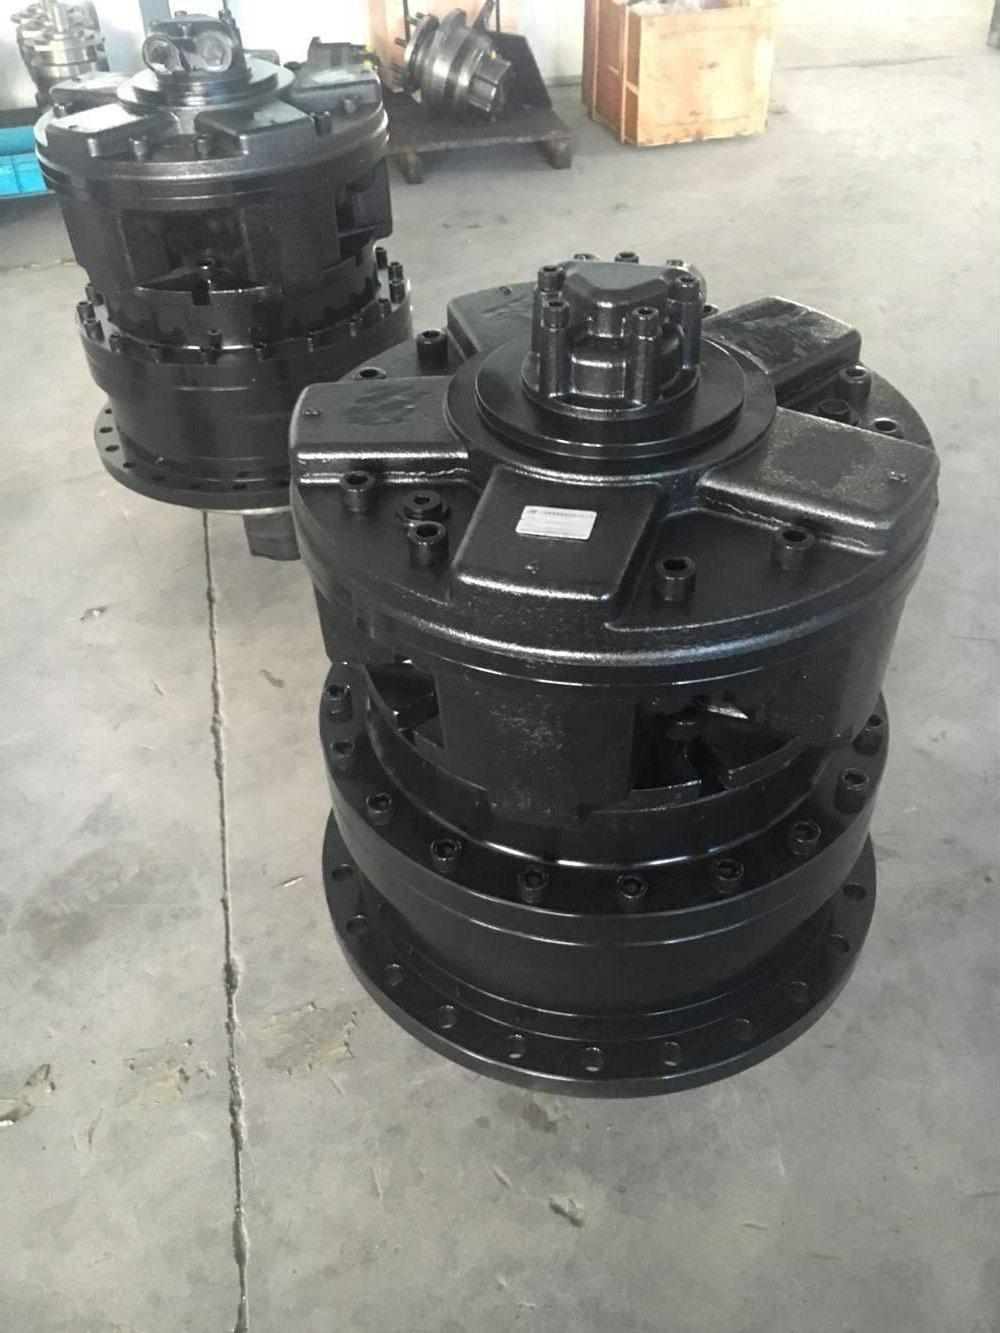 Itlay Sai GM1 GM2 GM3 GM4 GM5 GM5a GM6 GM7 GM9 GM Series Radial Piston Inside Five Star Hydraulic Motor with Reducer and Hydraulic Valve.